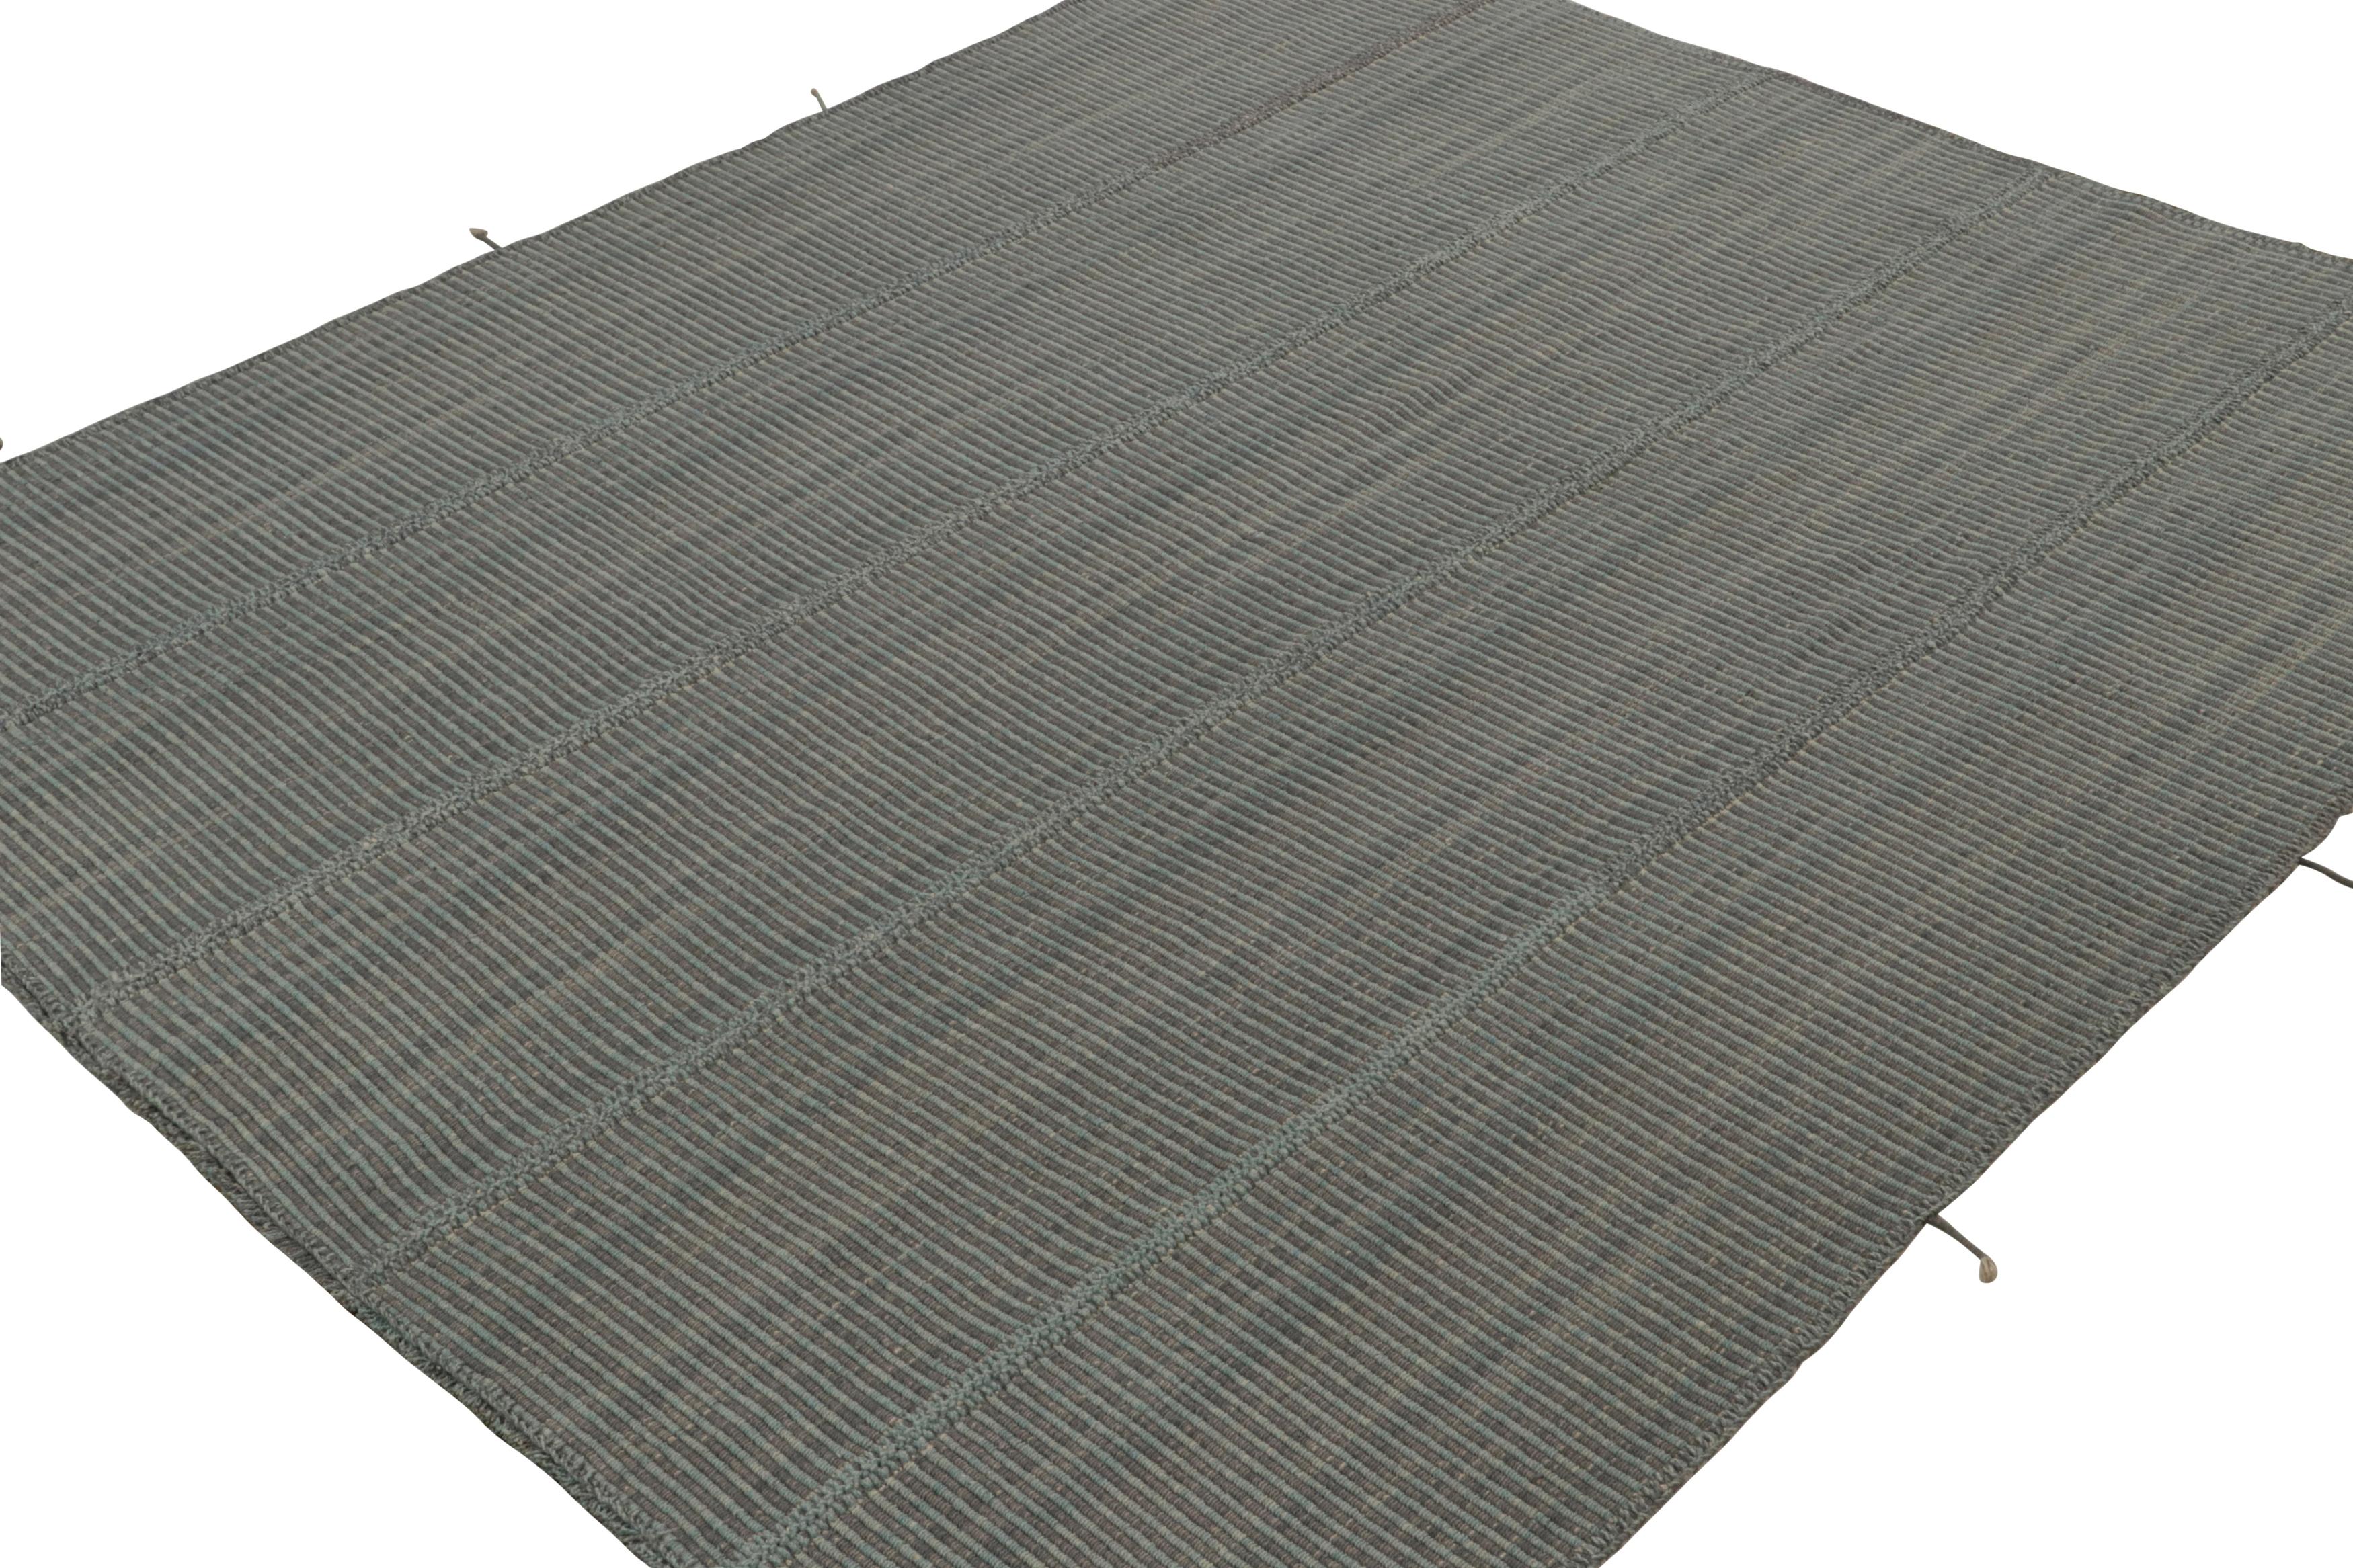 Handwoven in wool, an 8x10 Kilim design from an inventive new contemporary flat weave collection by Rug & Kilim.

On the Design: 

Fondly dubbed, “Rez Kilims”, this modern take on classic panel-weaving enjoys a fabulous, unique play of cool slate